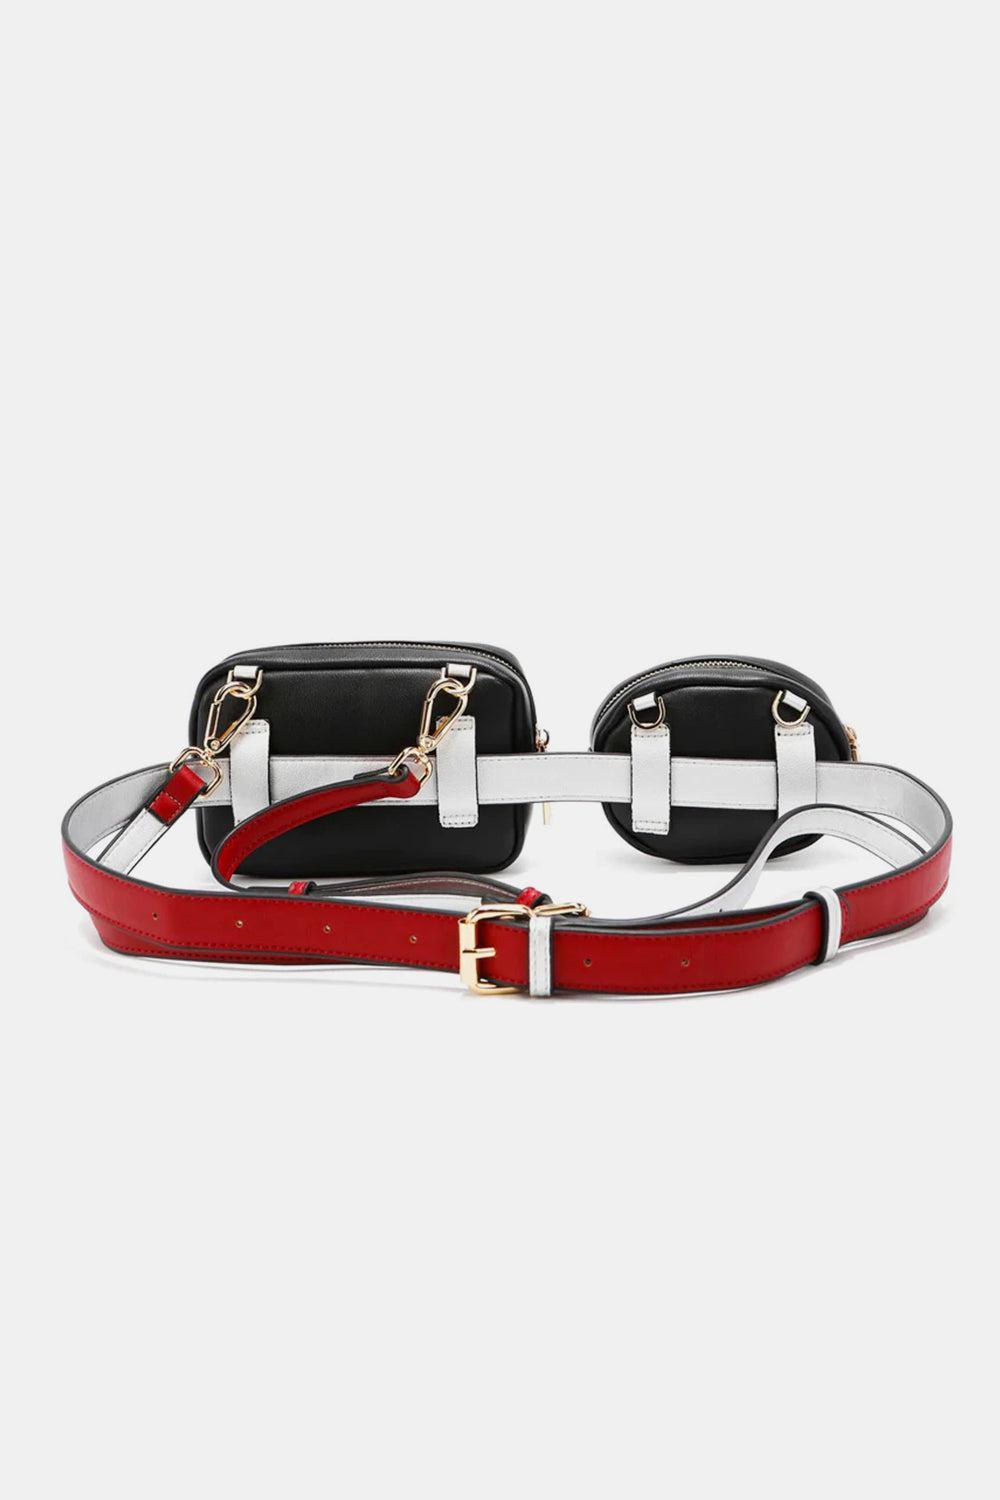 a black, white, and red belted bag